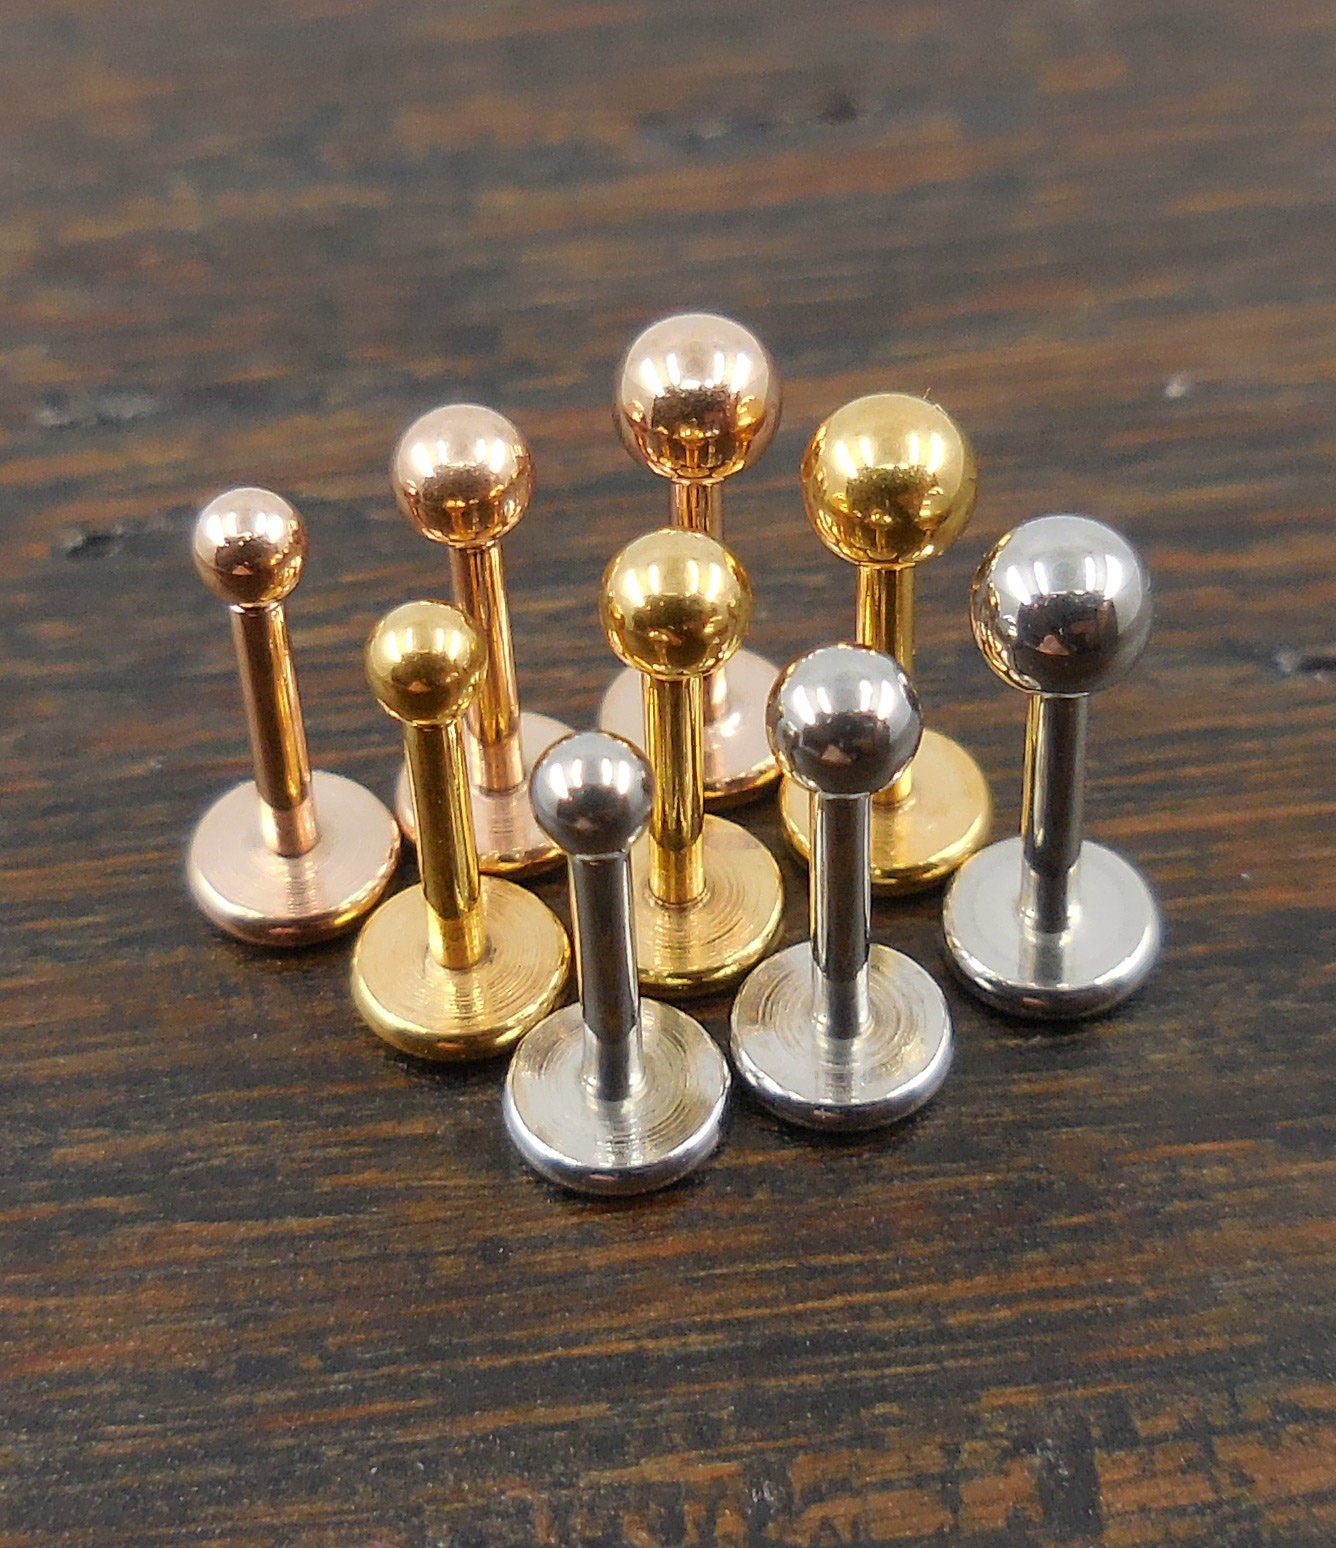 16G 18G 20G Threadless Push Pin Petite 2mm 2.5mm 3mm Ball Gold Stone Rose Helix Earring Cartilage Nose Stud Ring